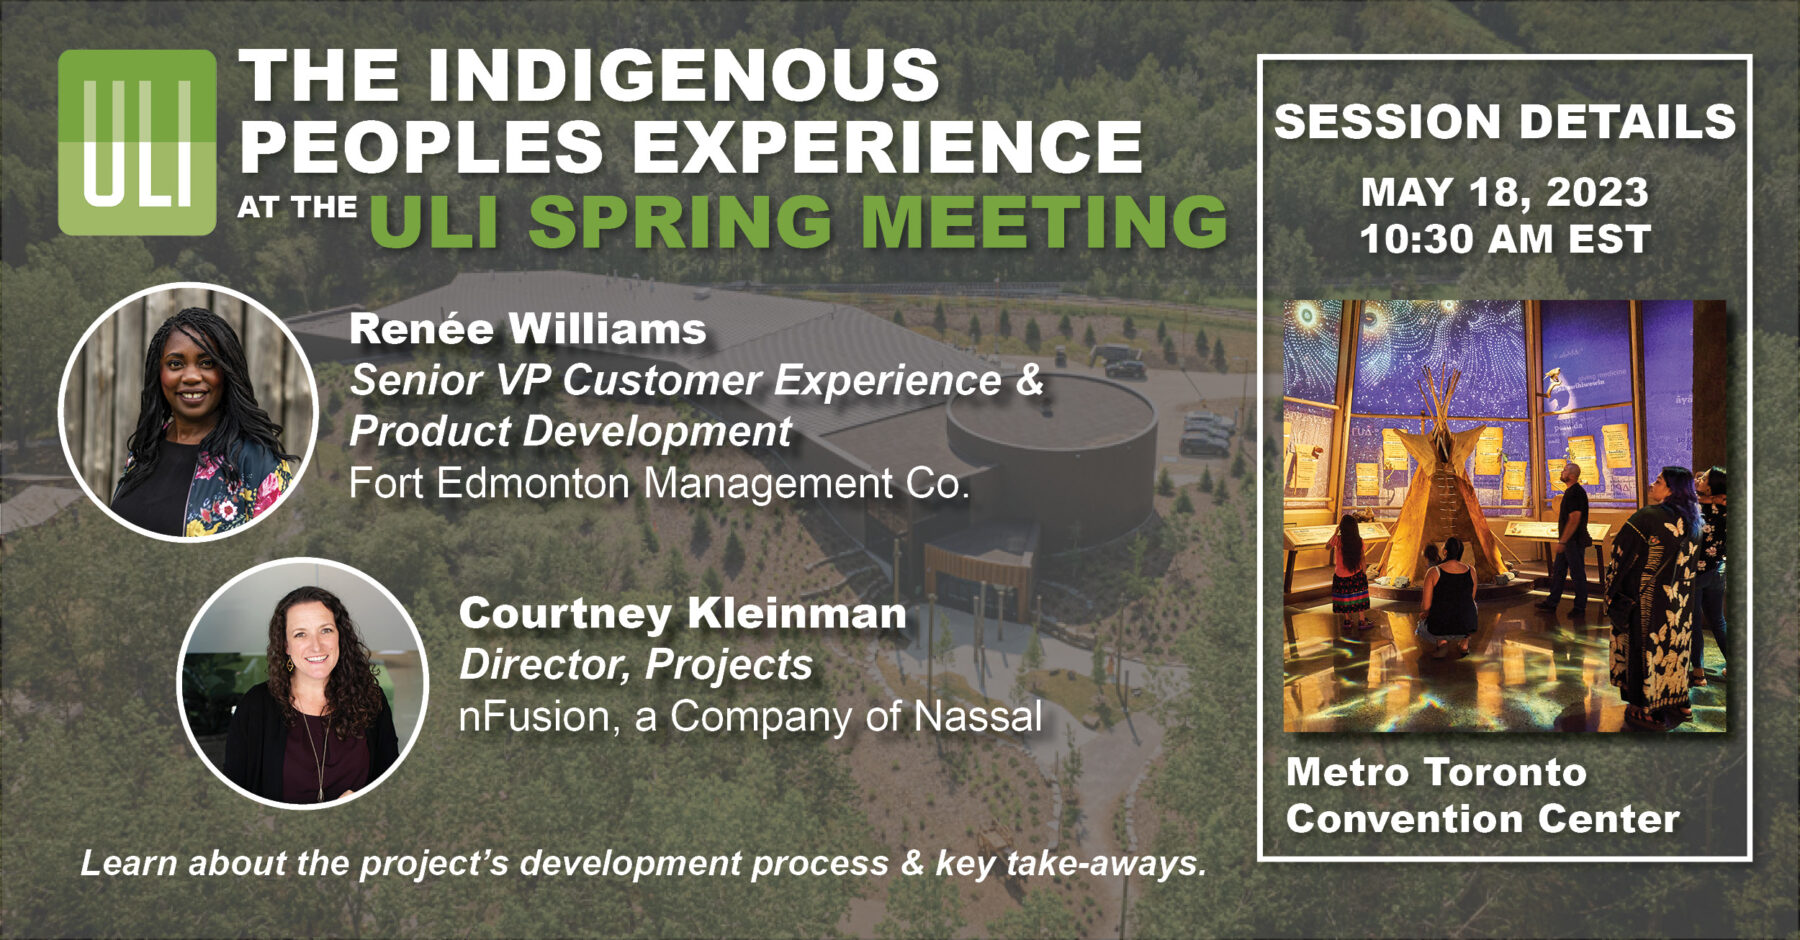 The Indigenous Peoples Experience at ULI Spring Meeting